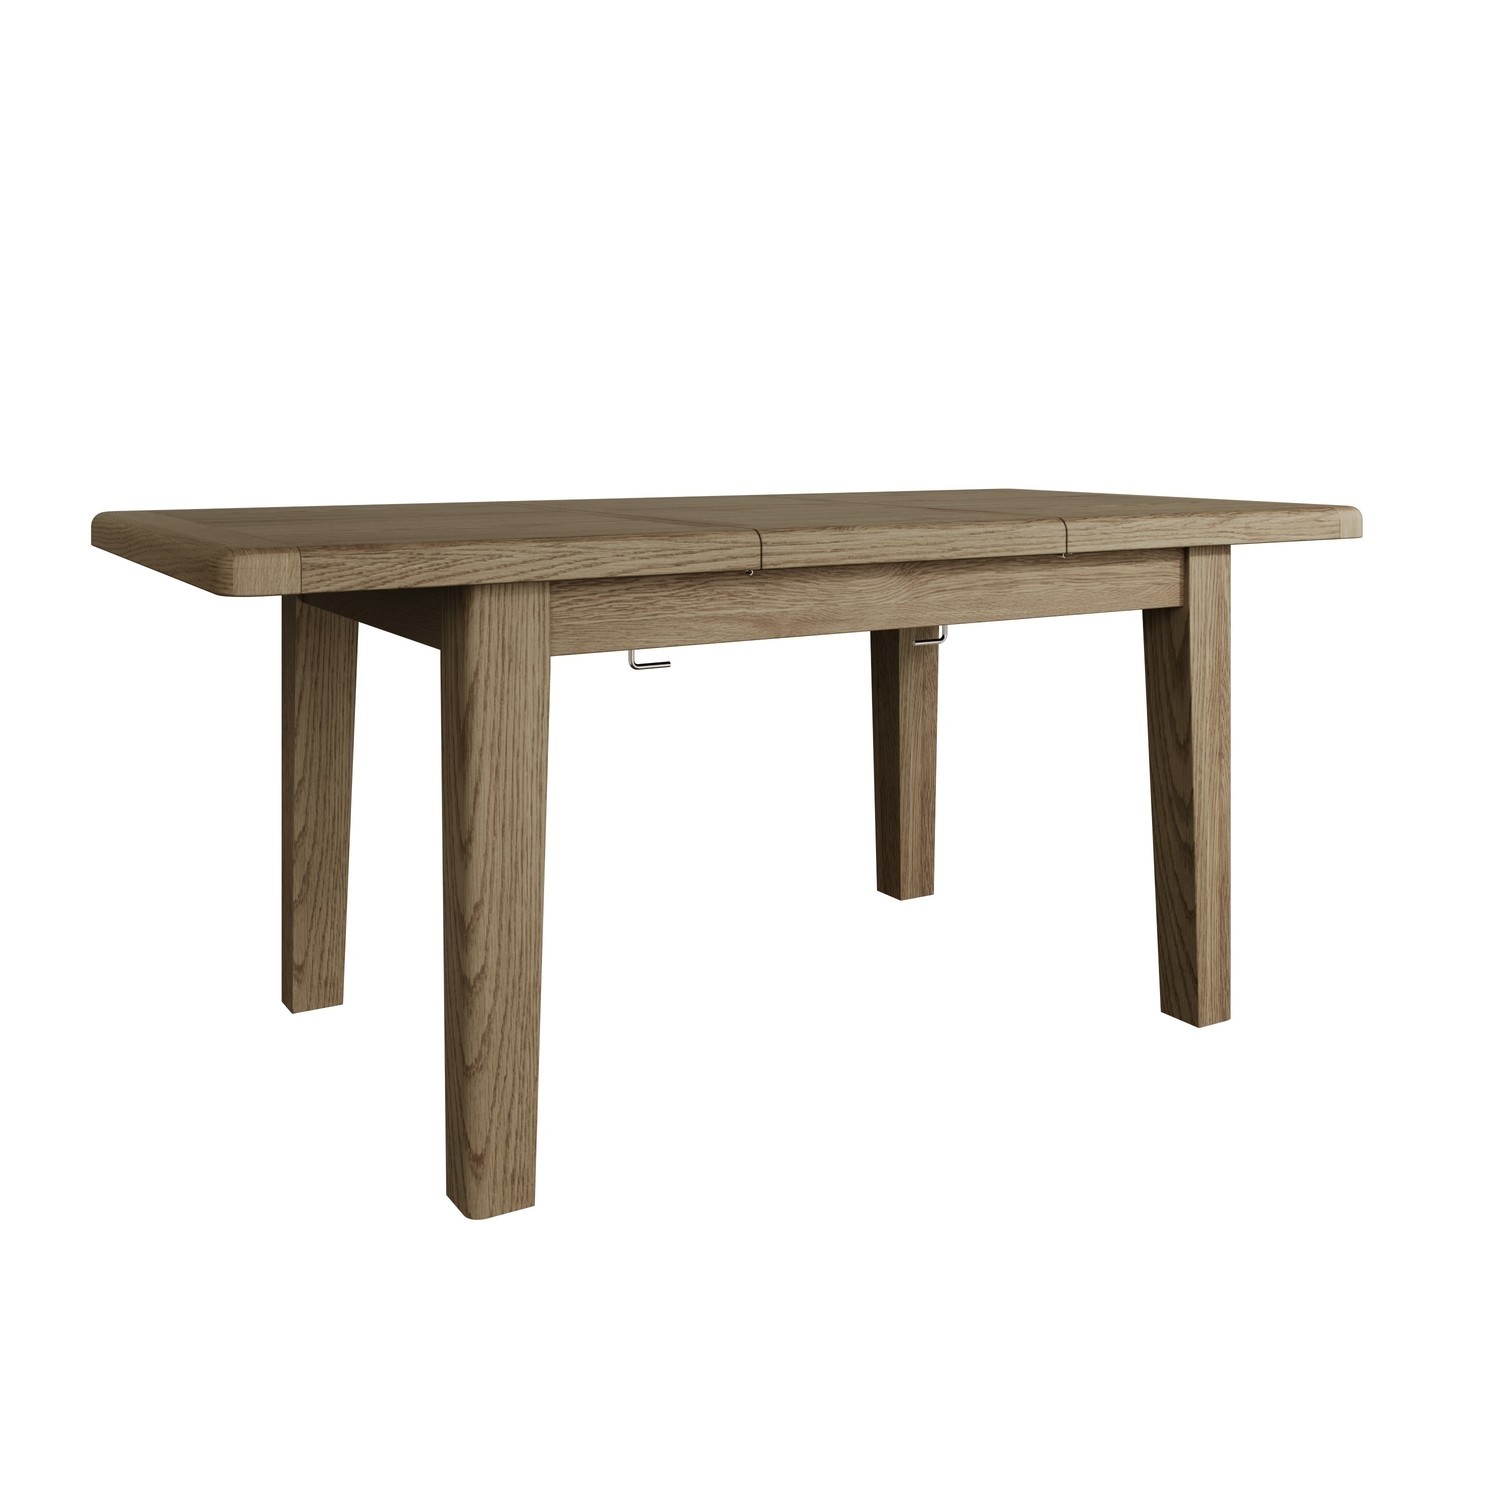 Photo of Oak extendable dining table